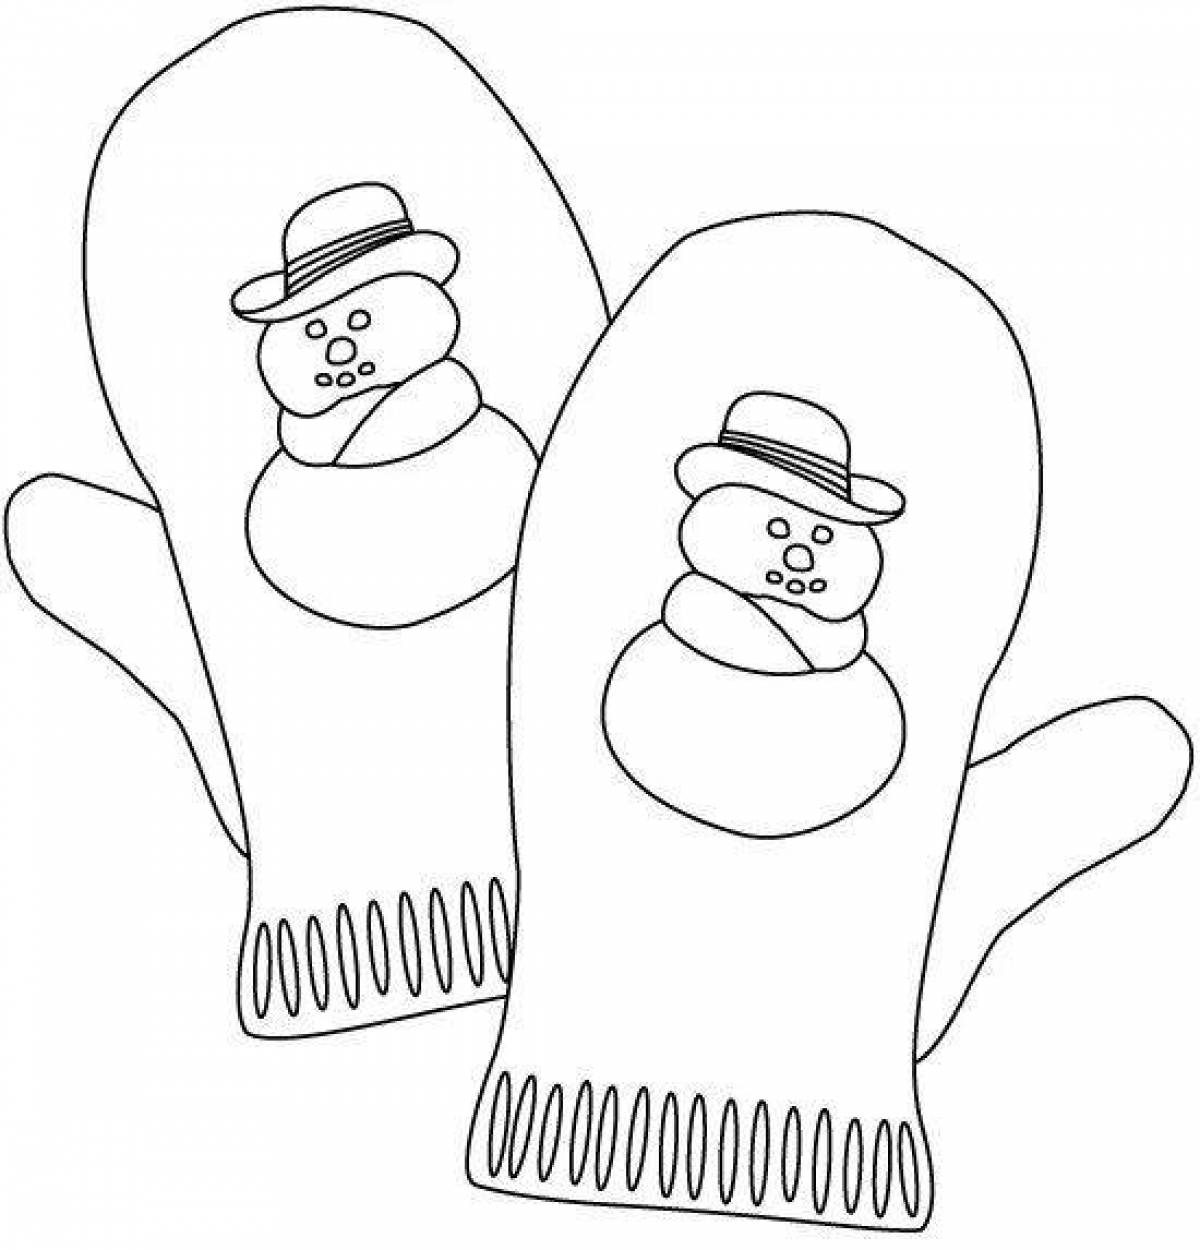 Sparkling mittens coloring book for kids